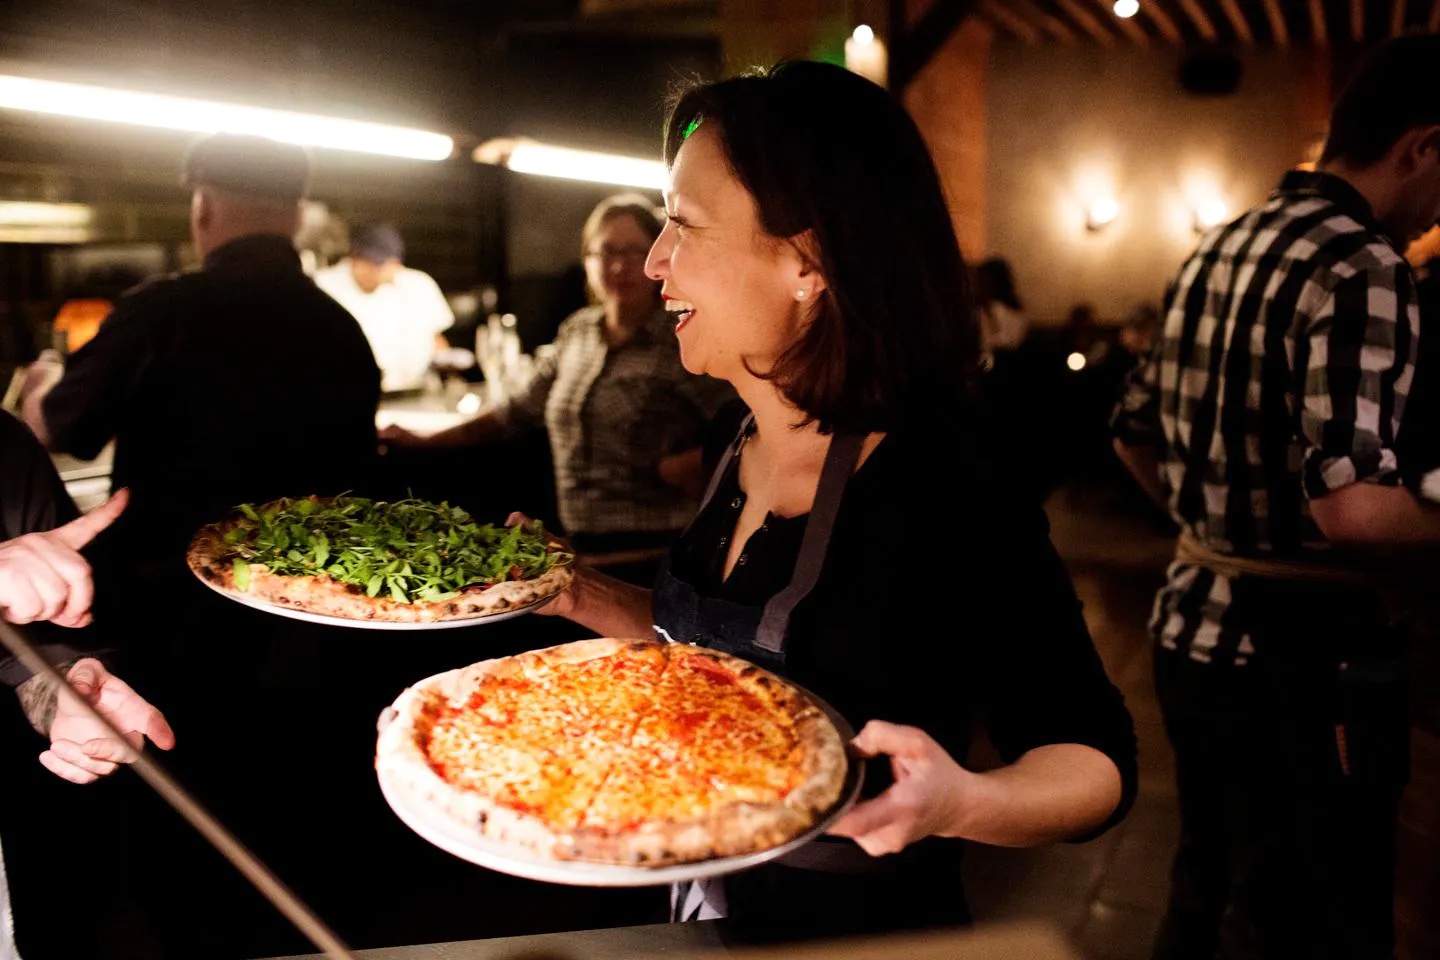 A person of medium-light skin tone holding two pizzas in a crowded restaurant.